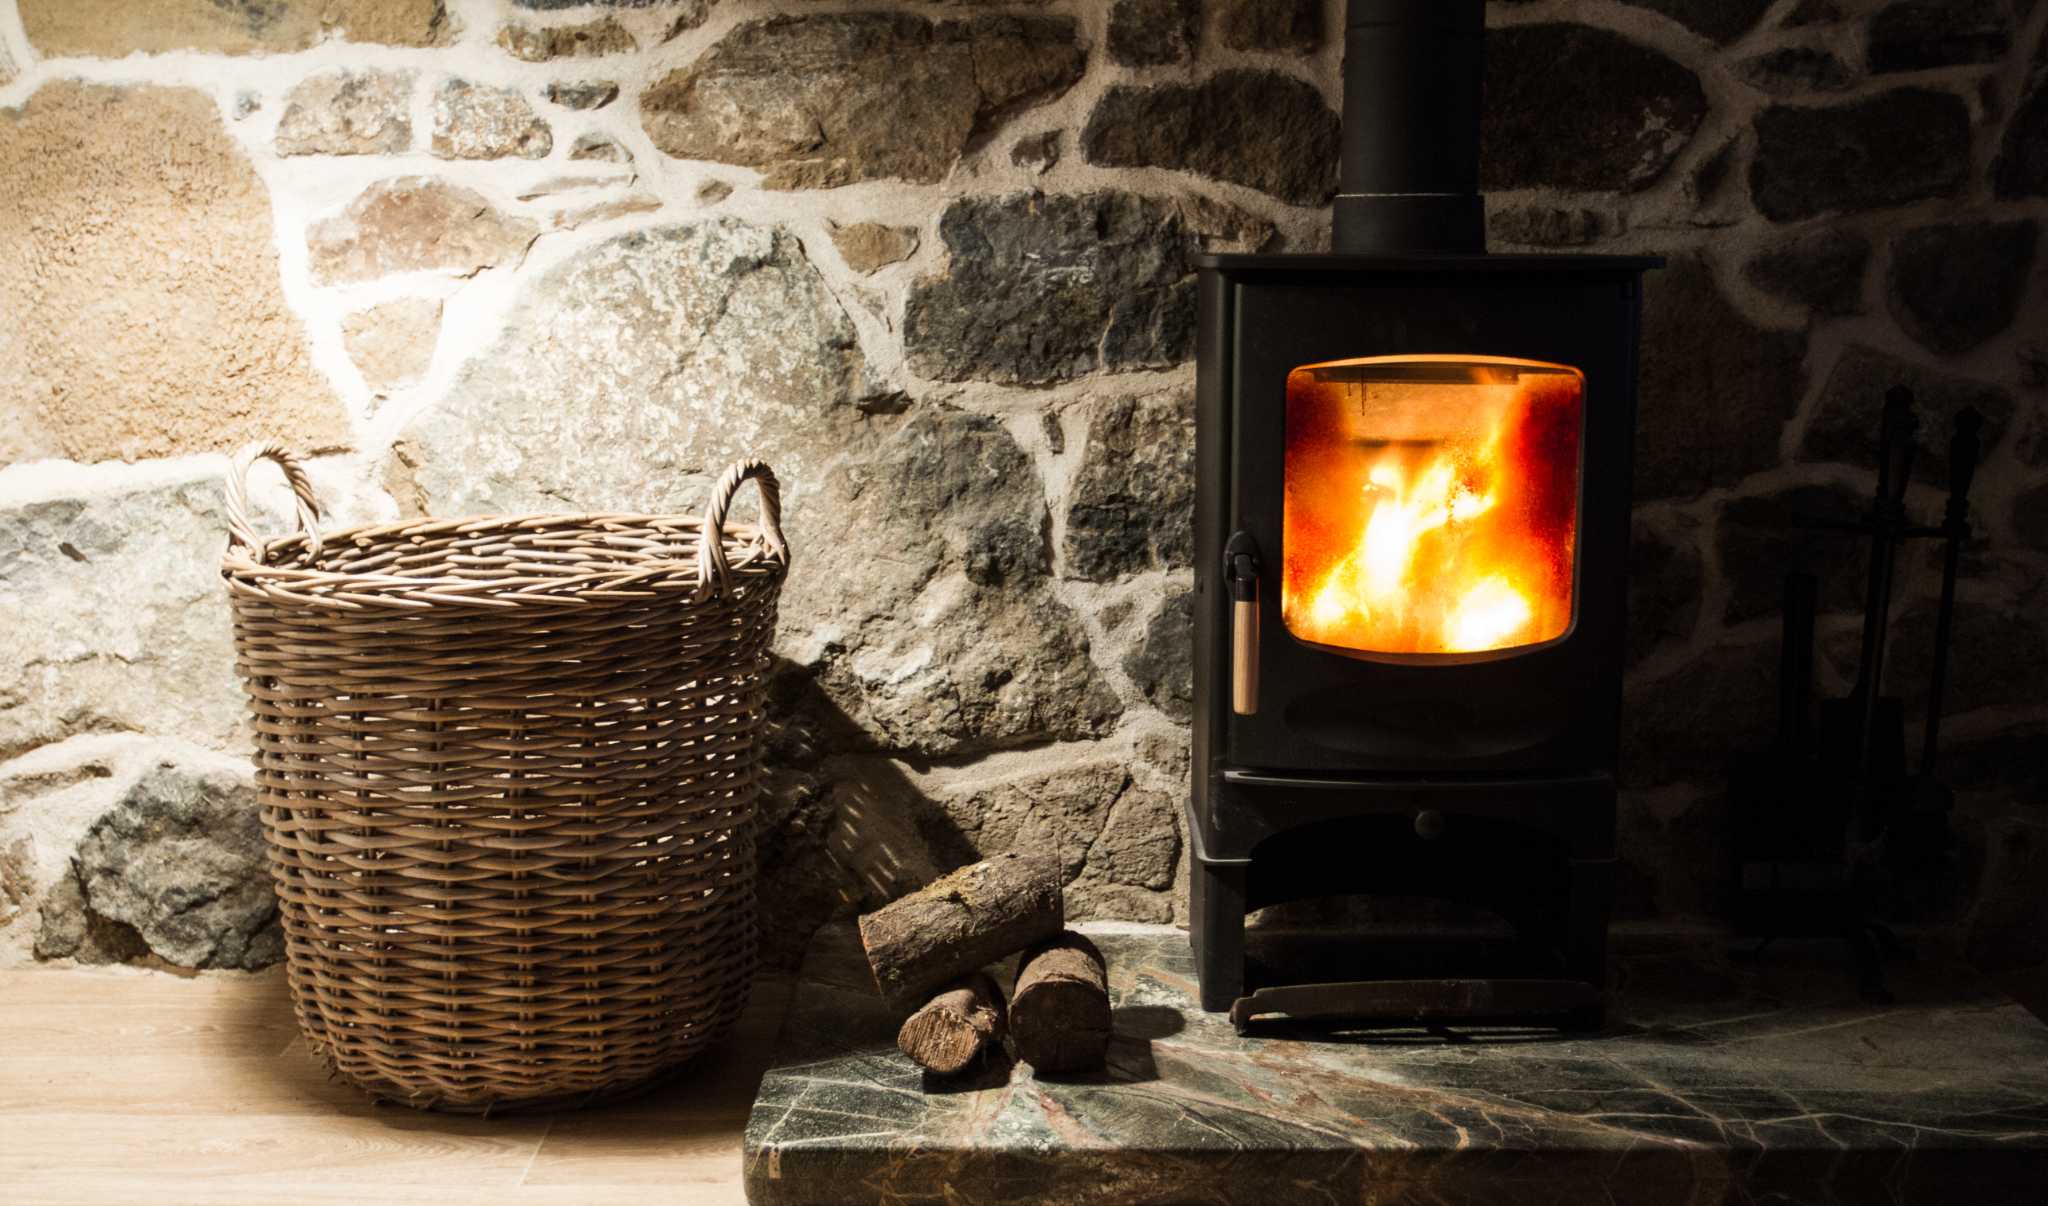 Moving Hot Air: How to Heat Your House Using Your Fireplace